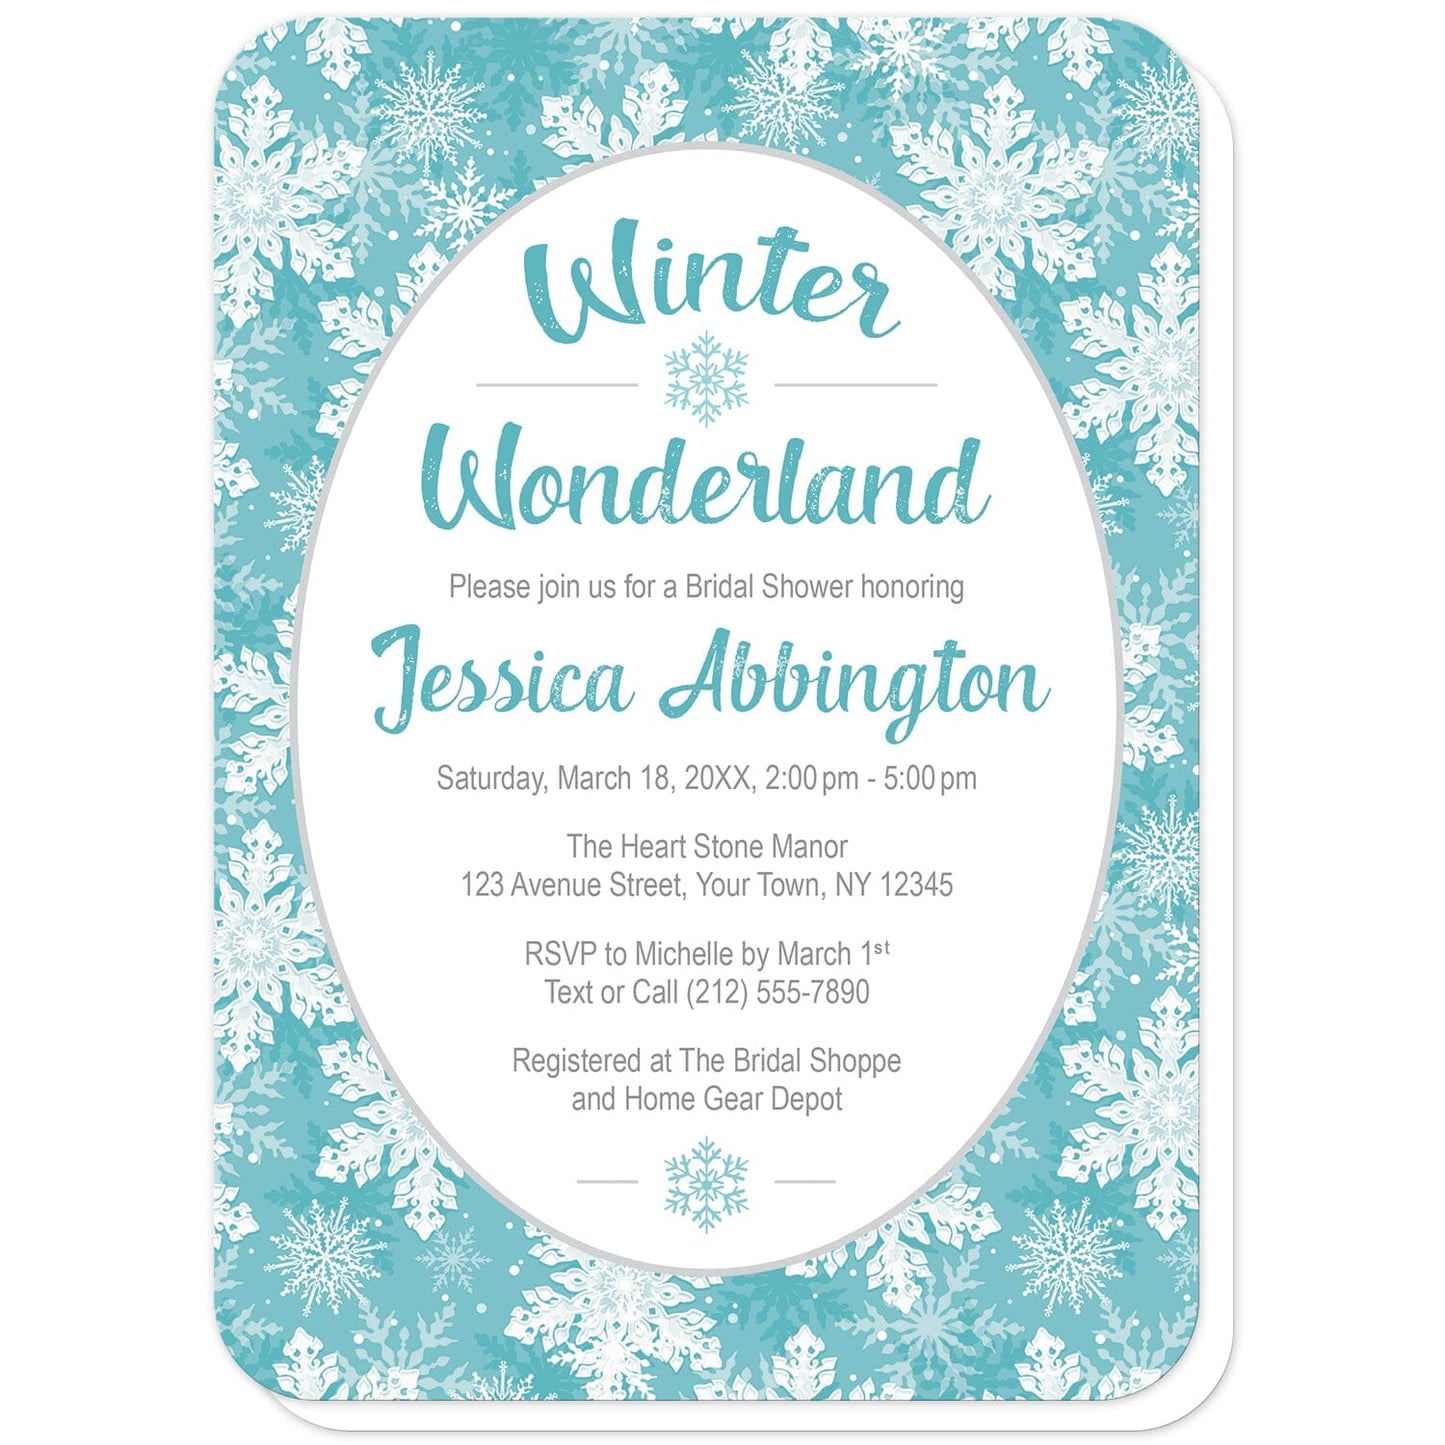 Teal Snowflake Winter Wonderland Bridal Shower Invitations (with rounded corners) at Artistically Invited. Beautifully ornate teal snowflake Winter Wonderland bridal shower invitations designed with your personalized bridal shower celebration details custom printed in teal and gray in a white oval frame design over a teal, turquoise, and white snowflake pattern background.